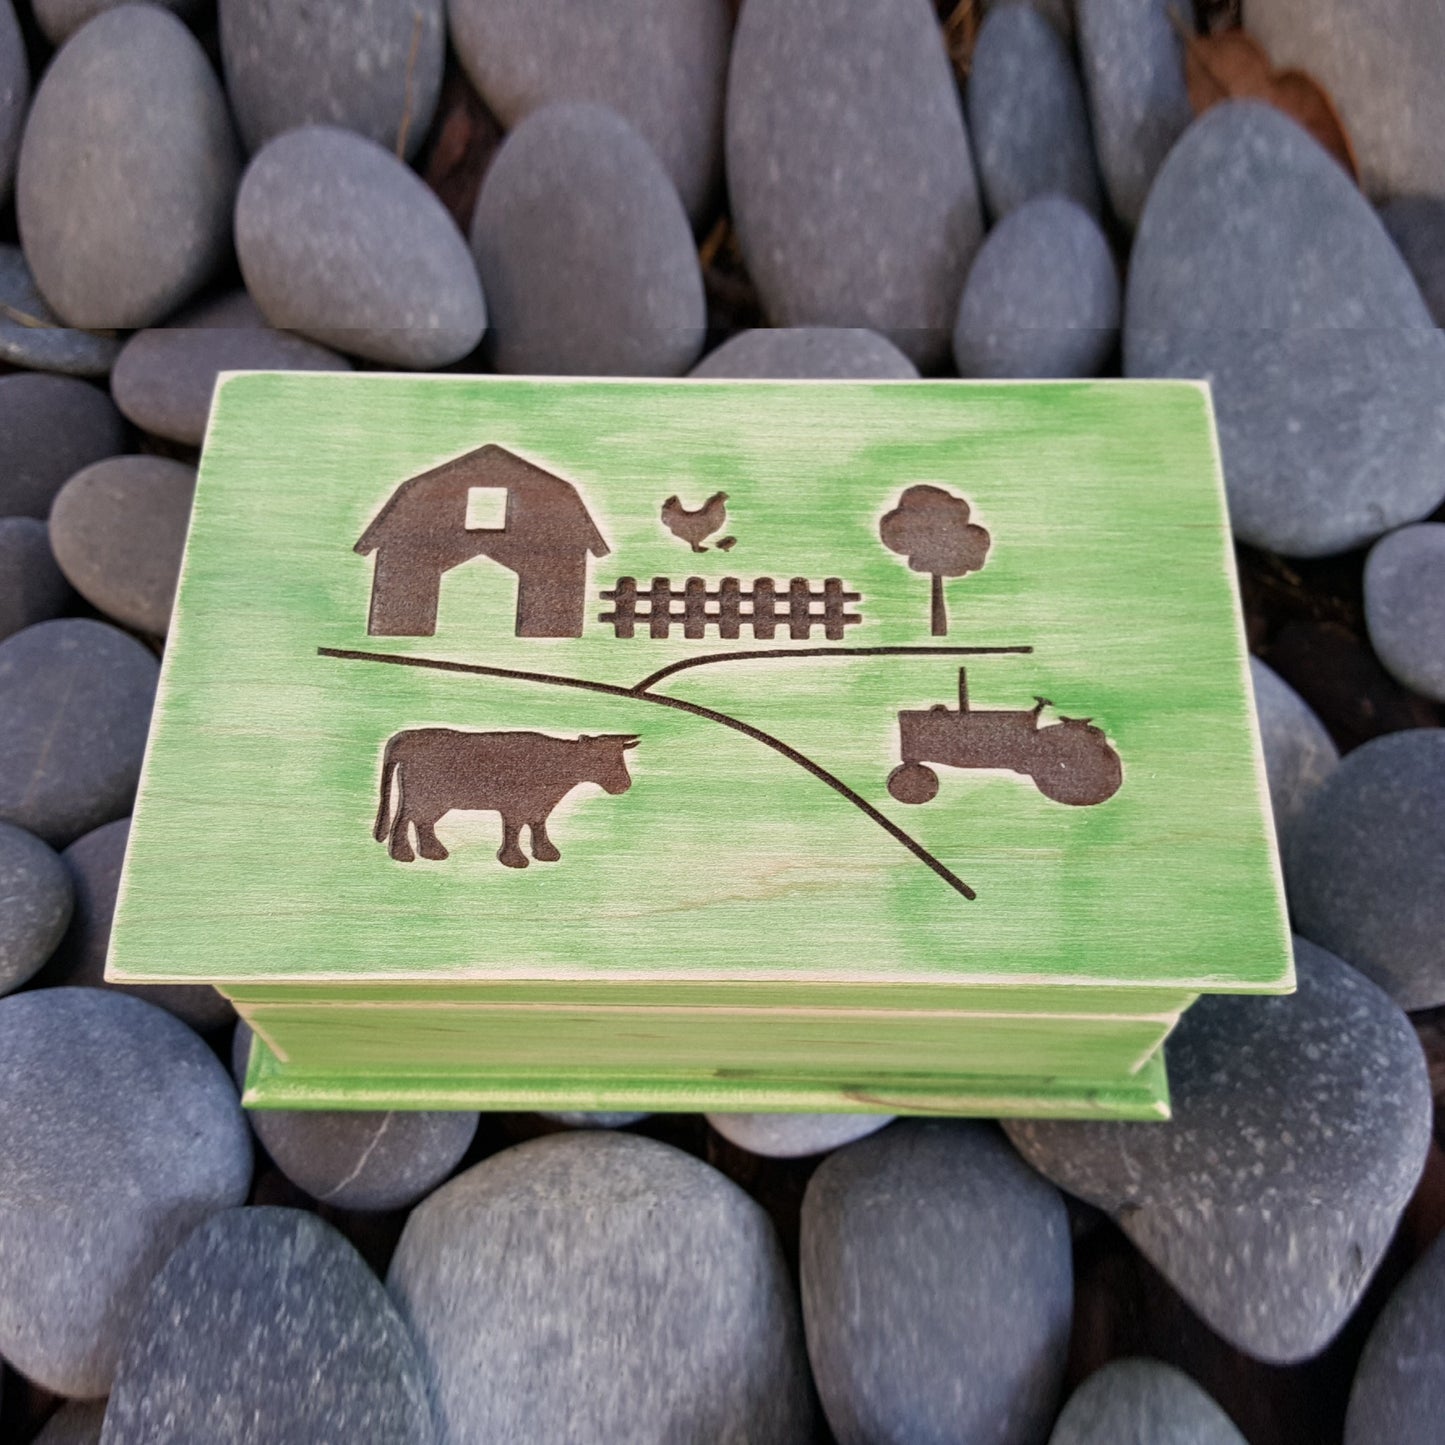 Farm theme gift, wooden jewelry box with built in wind up music player